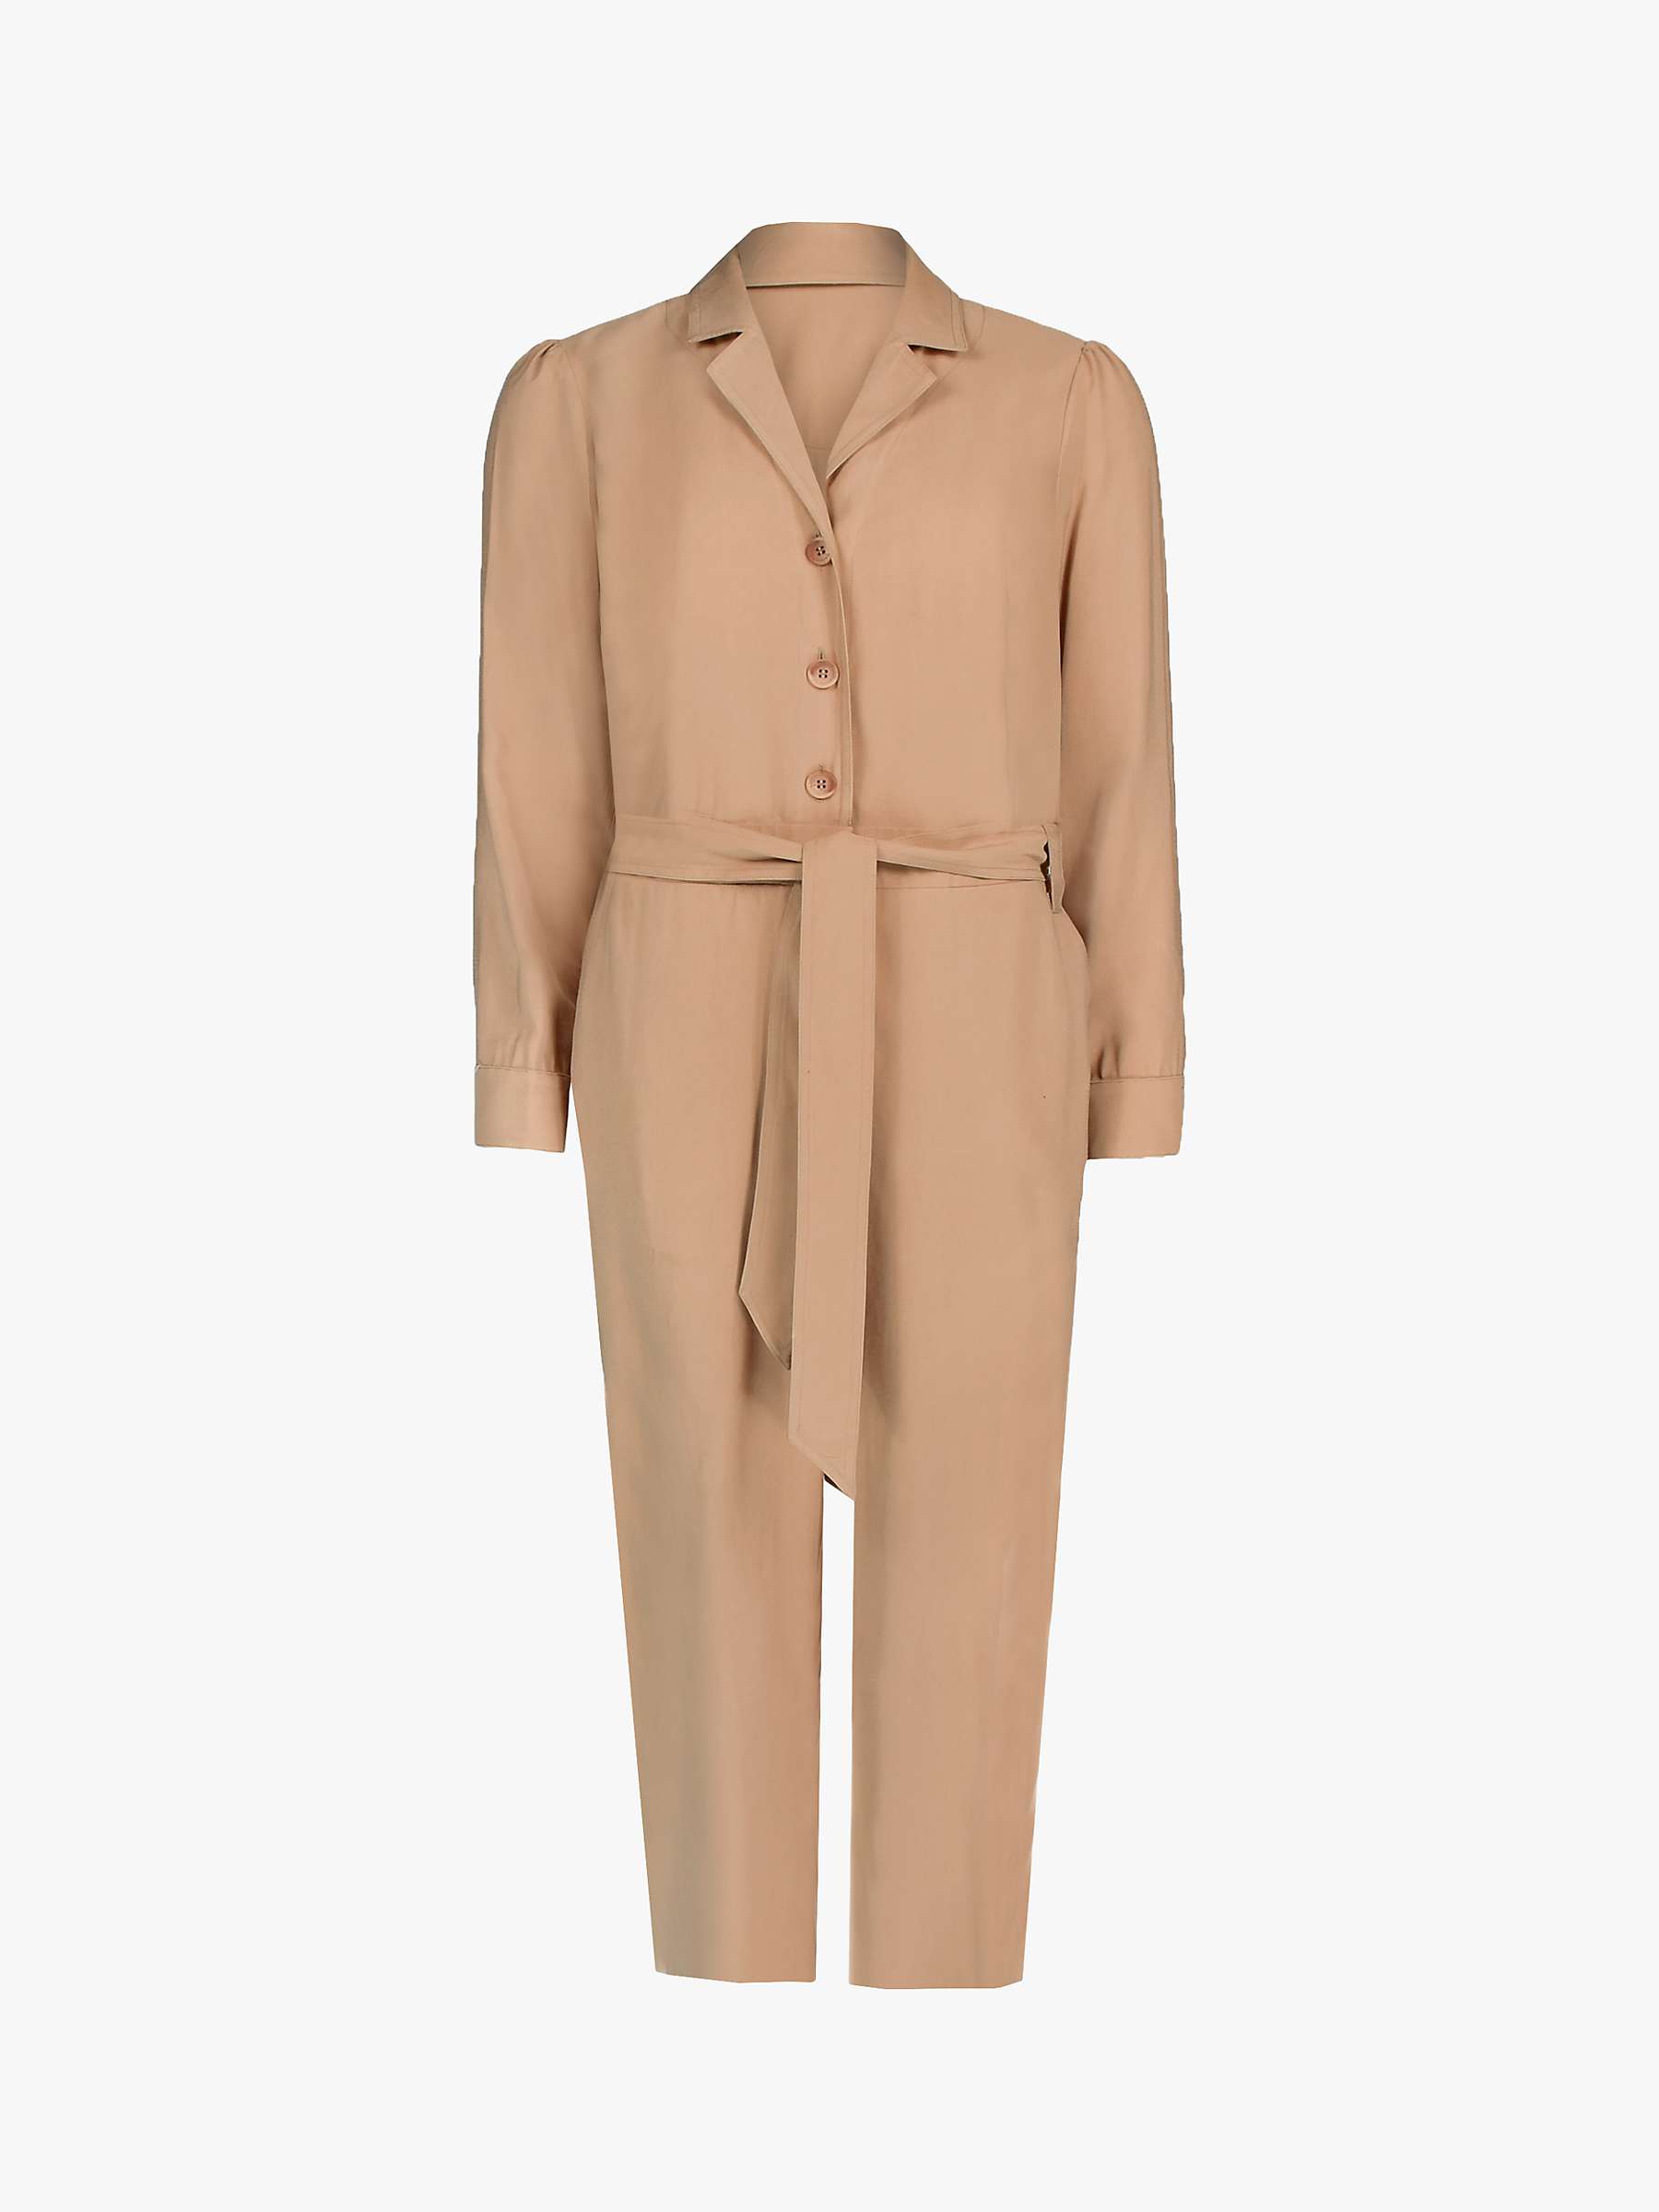 Buy Ro&Zo Twill Jumpsuit Online at johnlewis.com